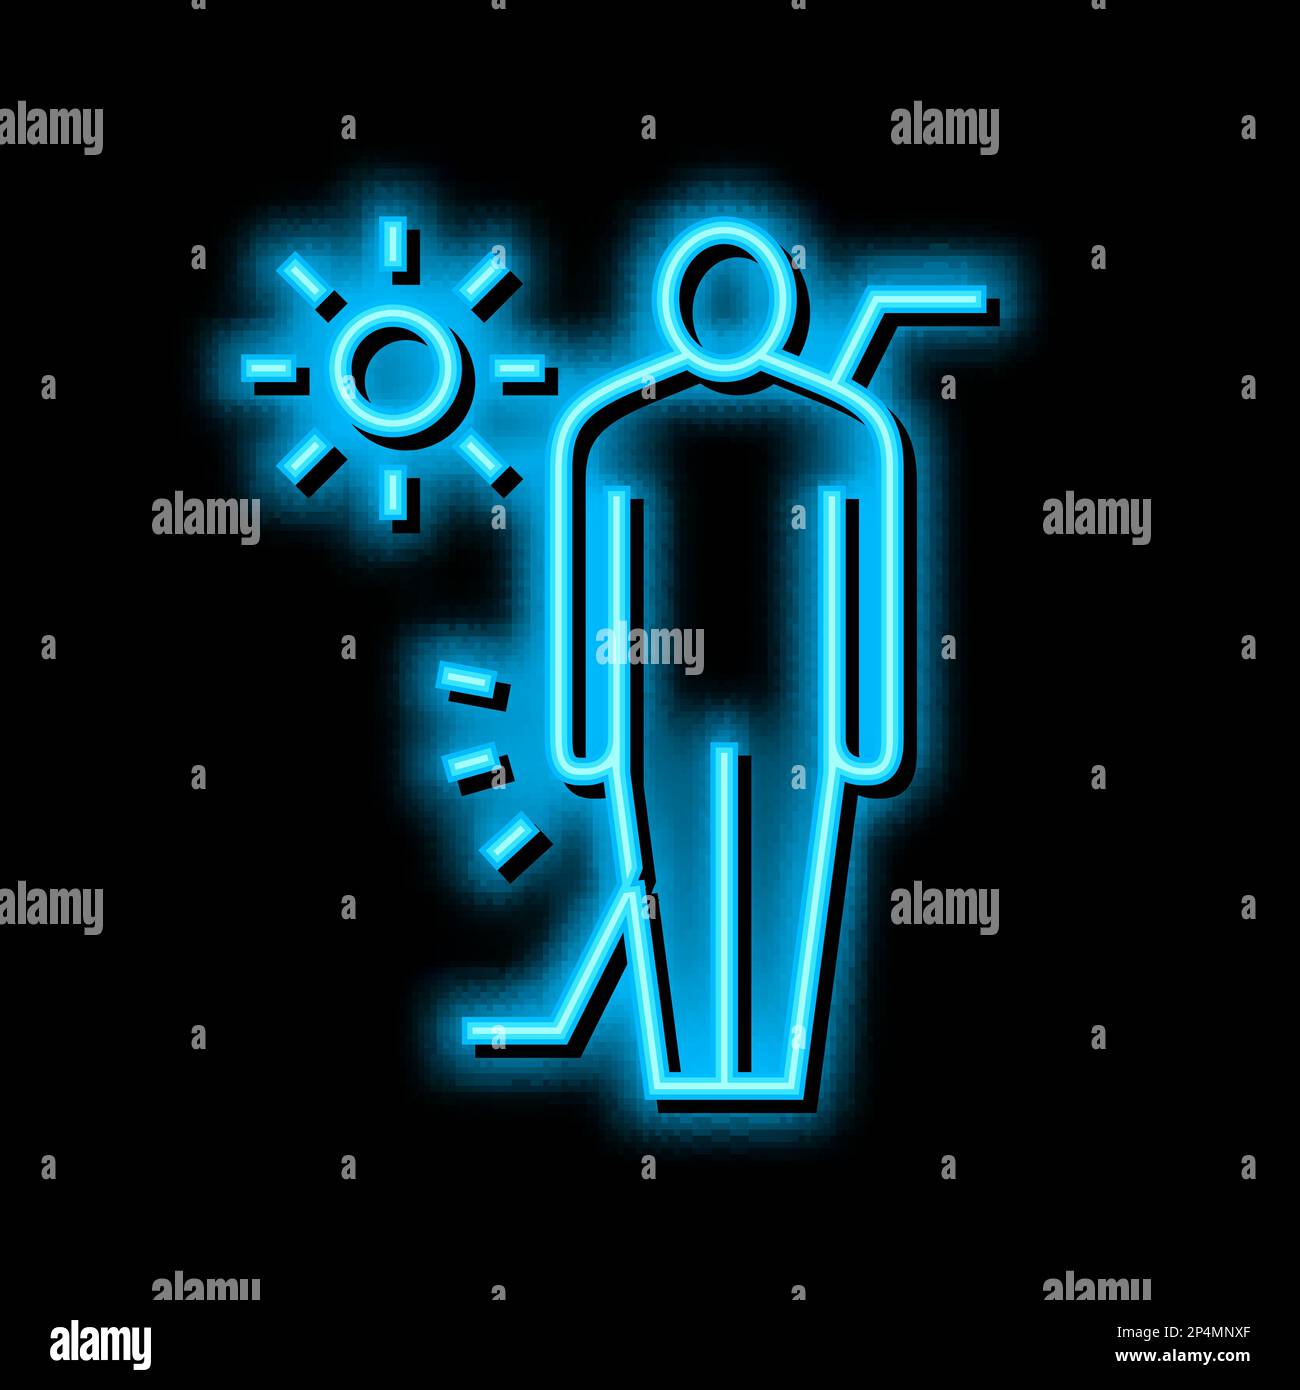 skin before and after tanning neon glow icon illustration Stock Vector